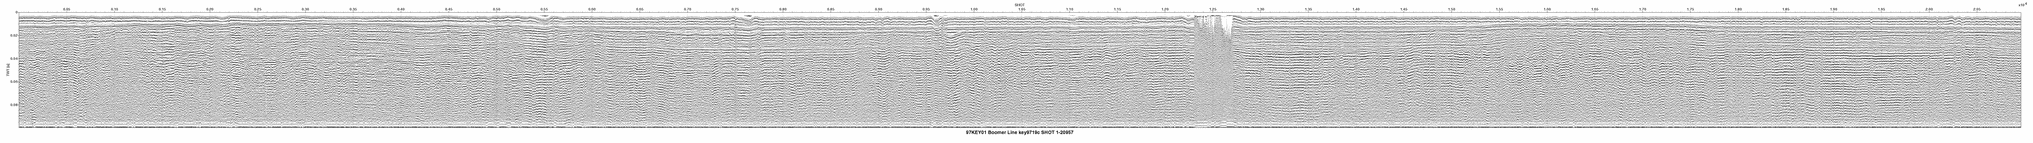 Thumbnail GIF image of the seismic trackline key9719c, with a hotlink to the more detailed, larger JPG image.